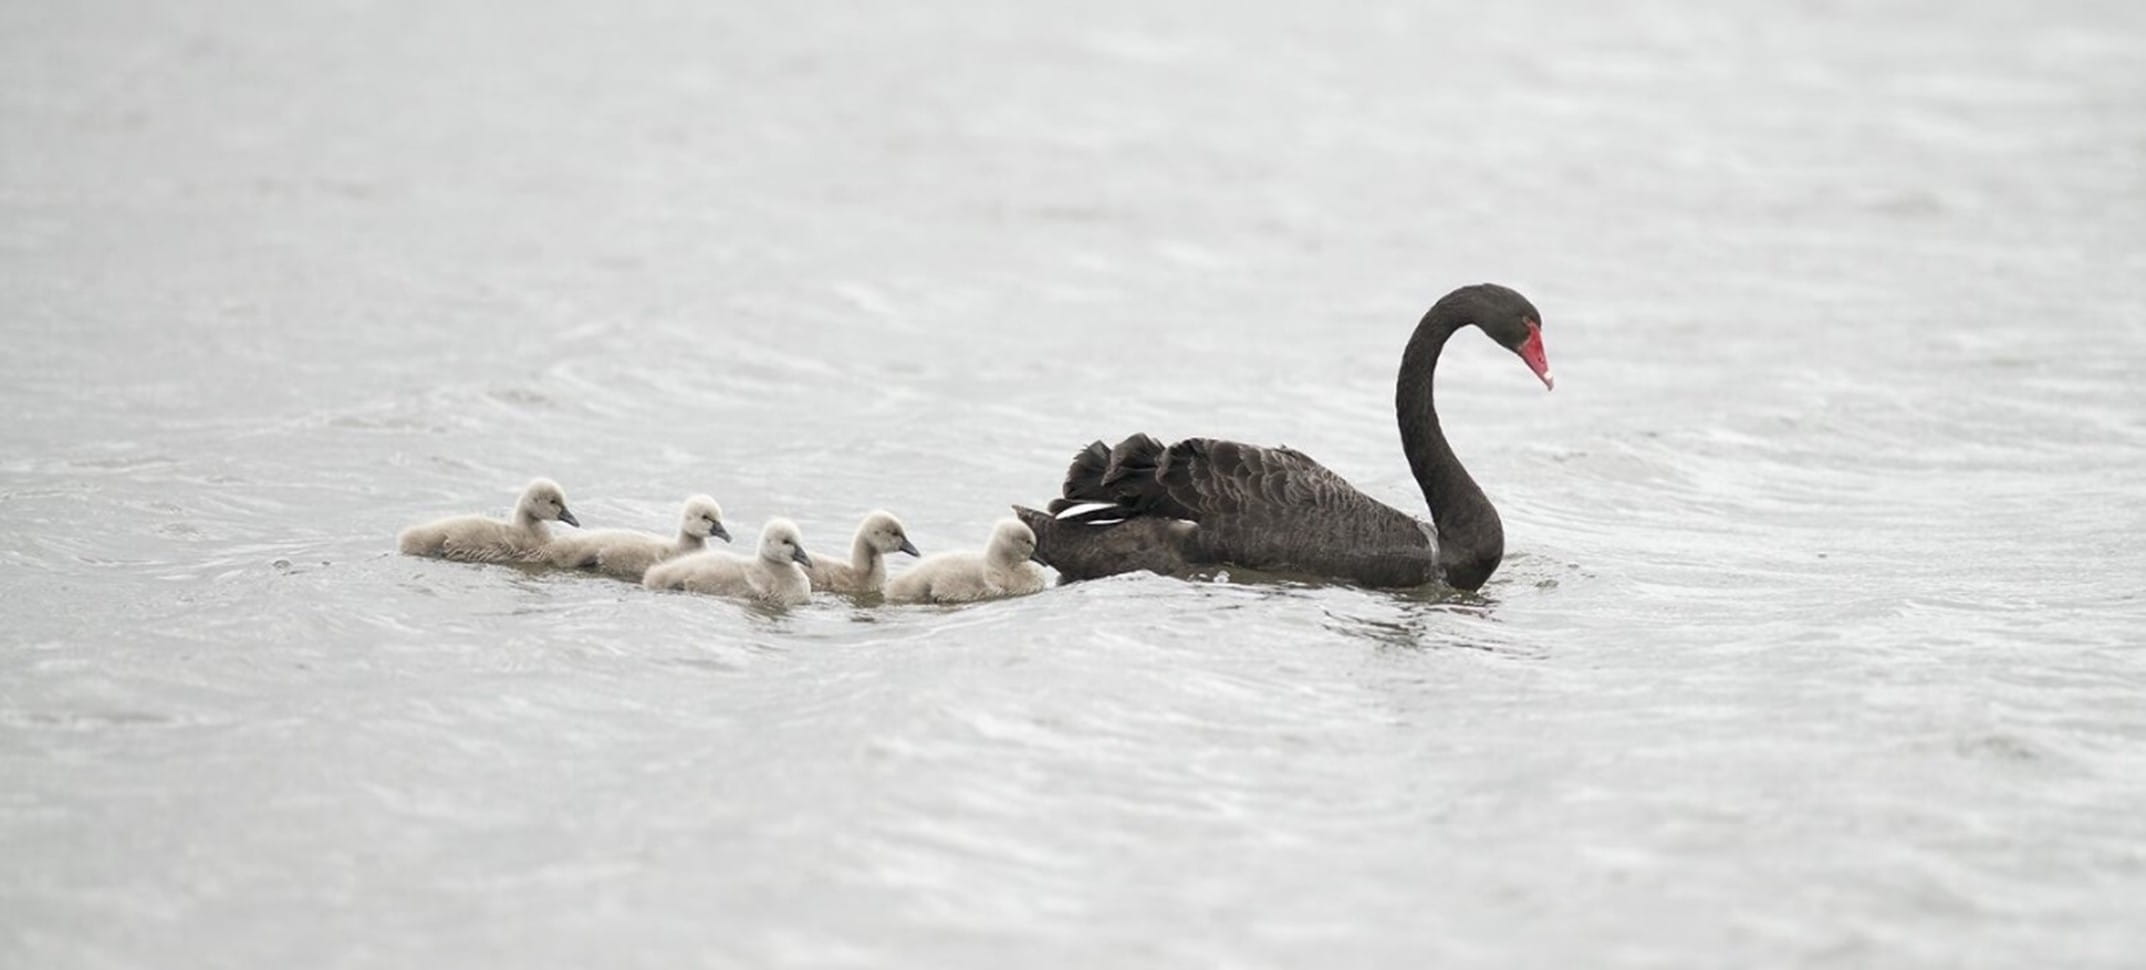 A large black swan is followed by its babies on the water